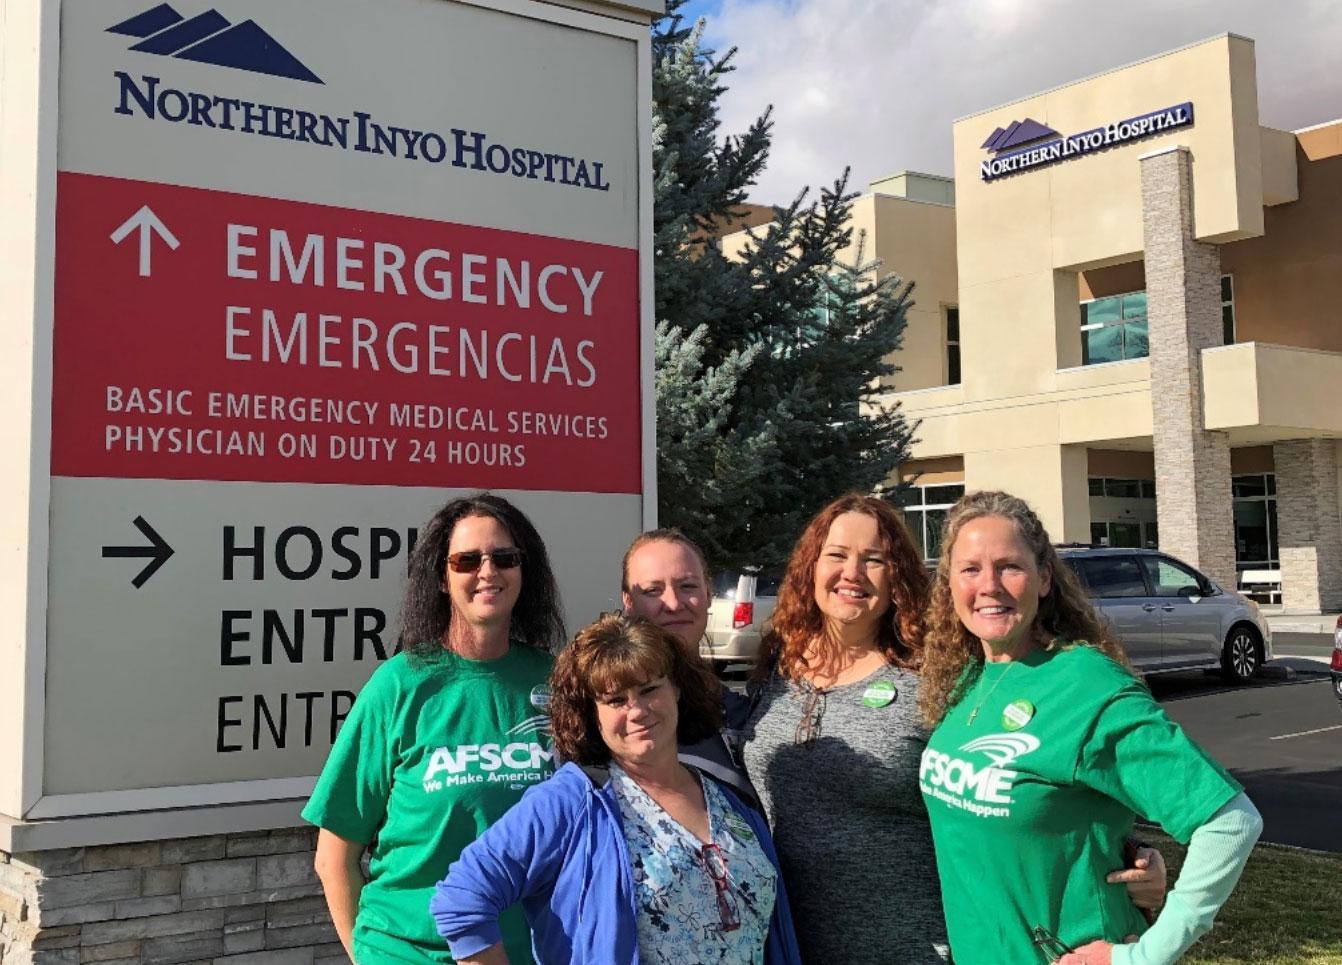 Members of the union organizing committee at the Northern Inyo Hospital District